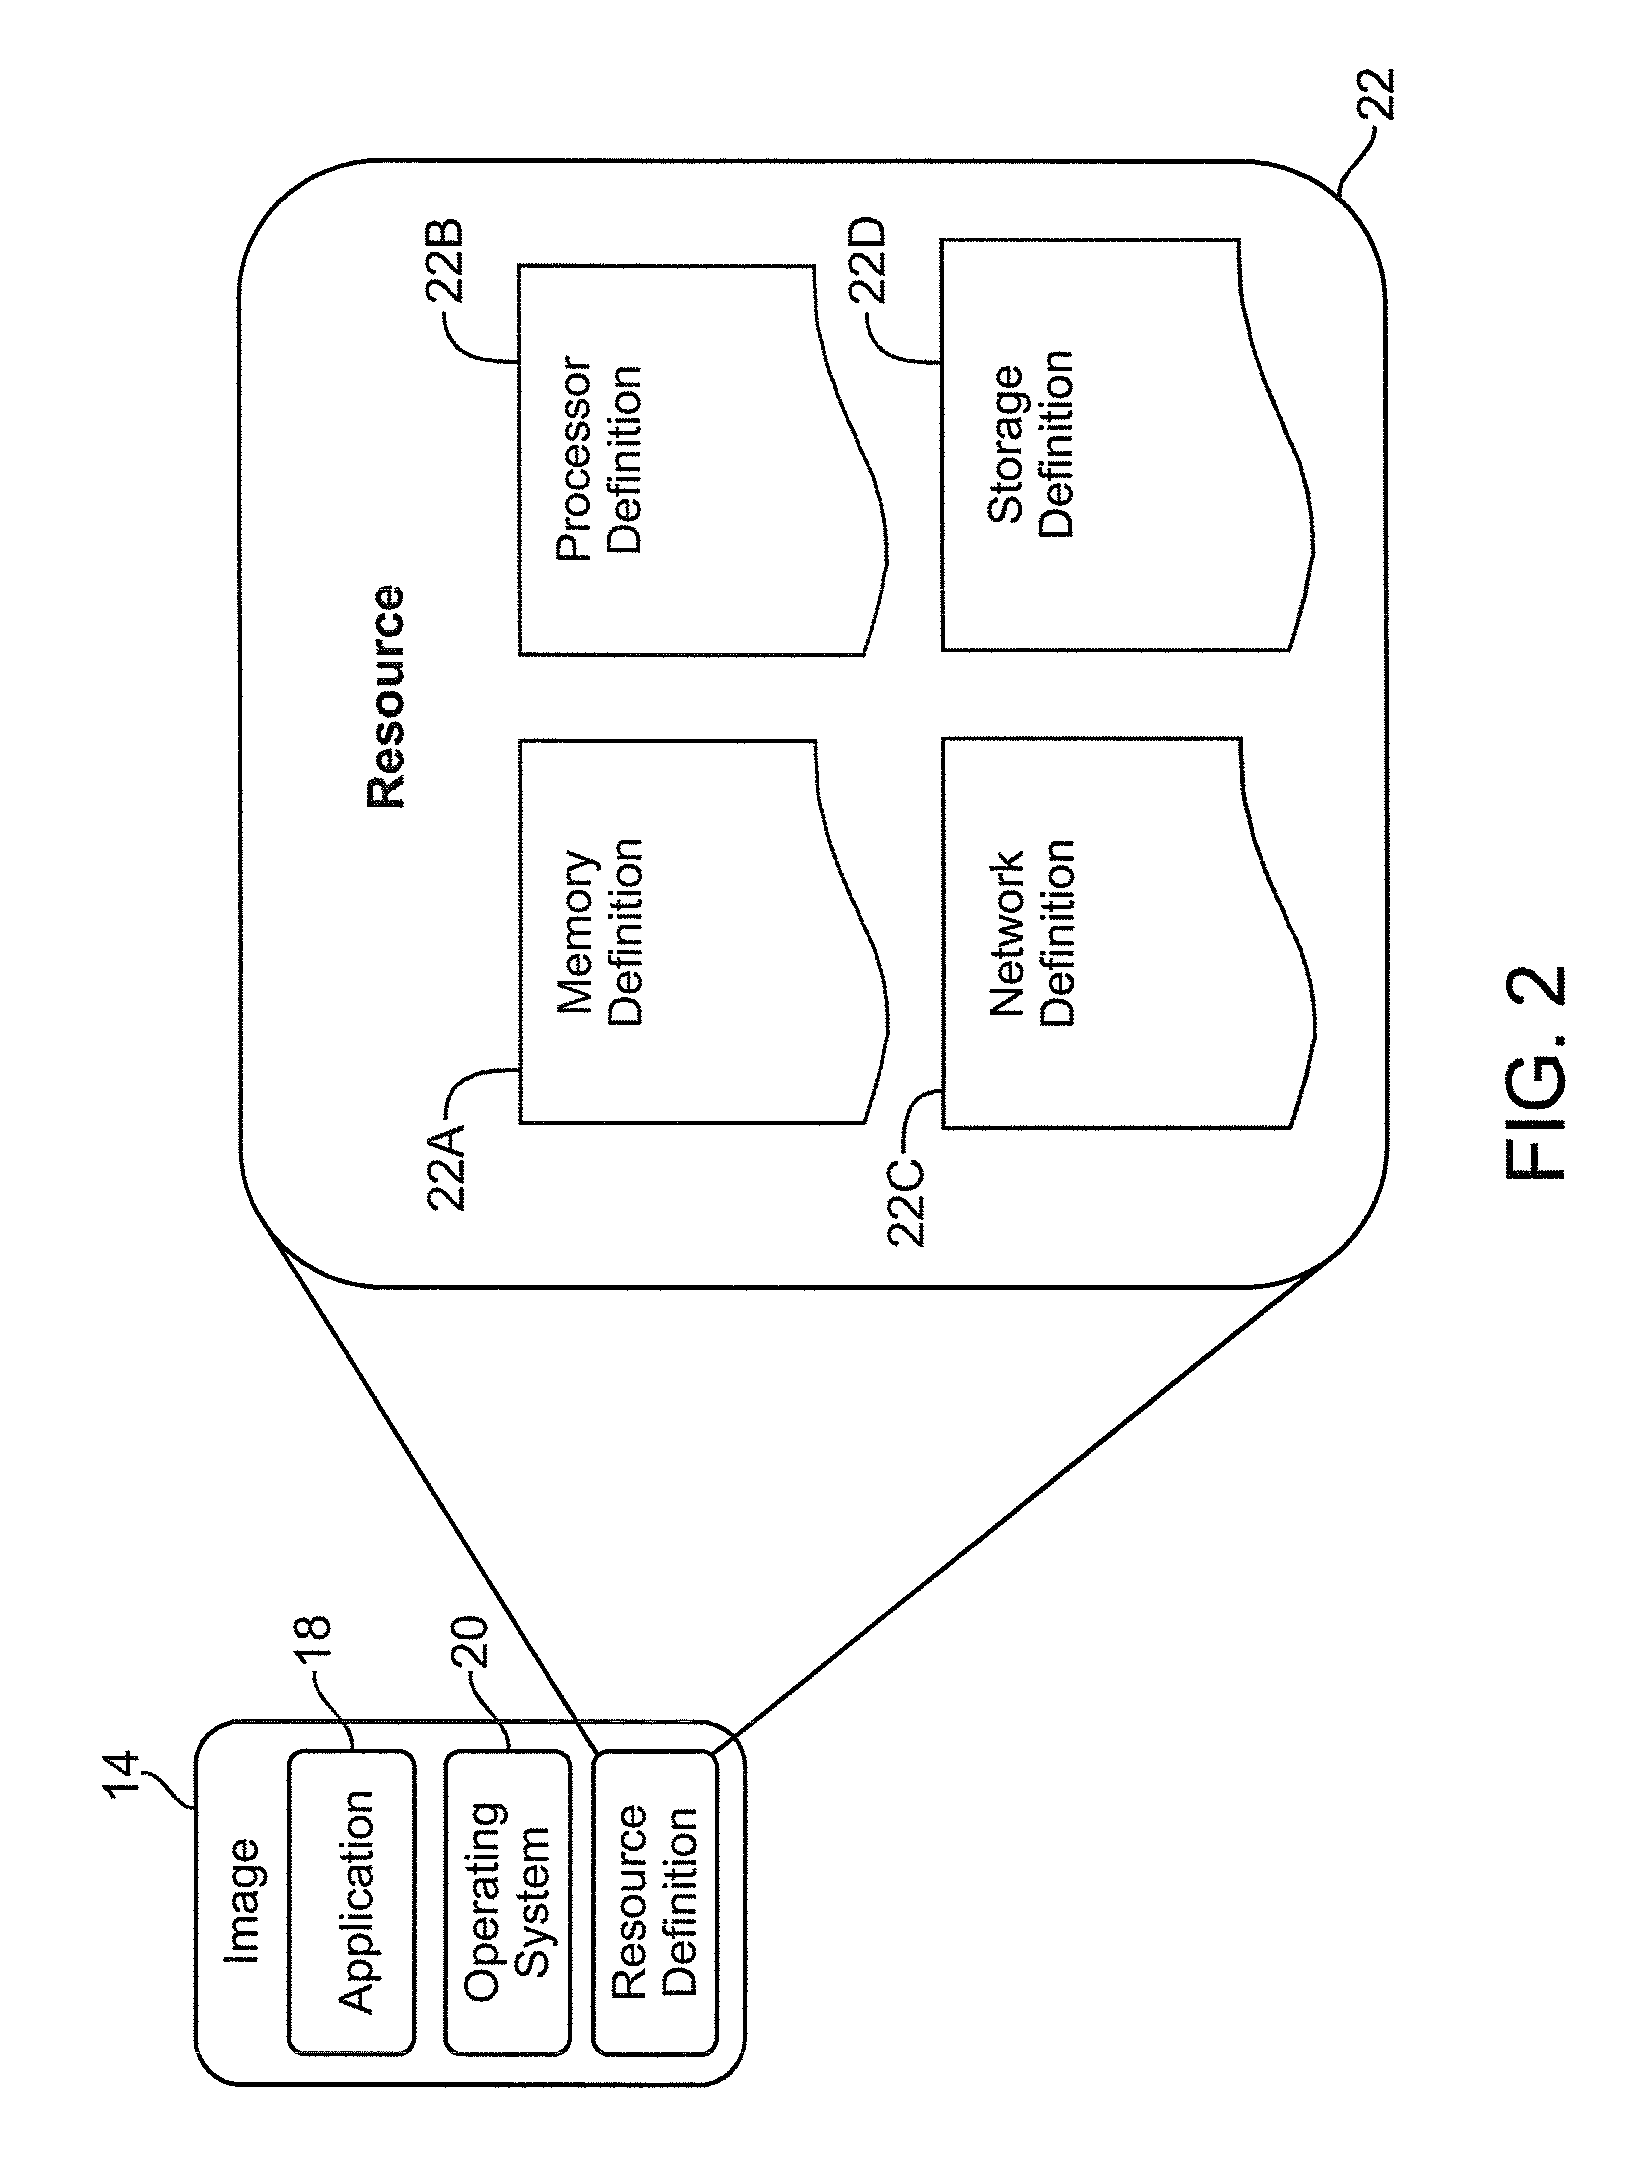 Method and system for integrated deployment planning for virtual appliances